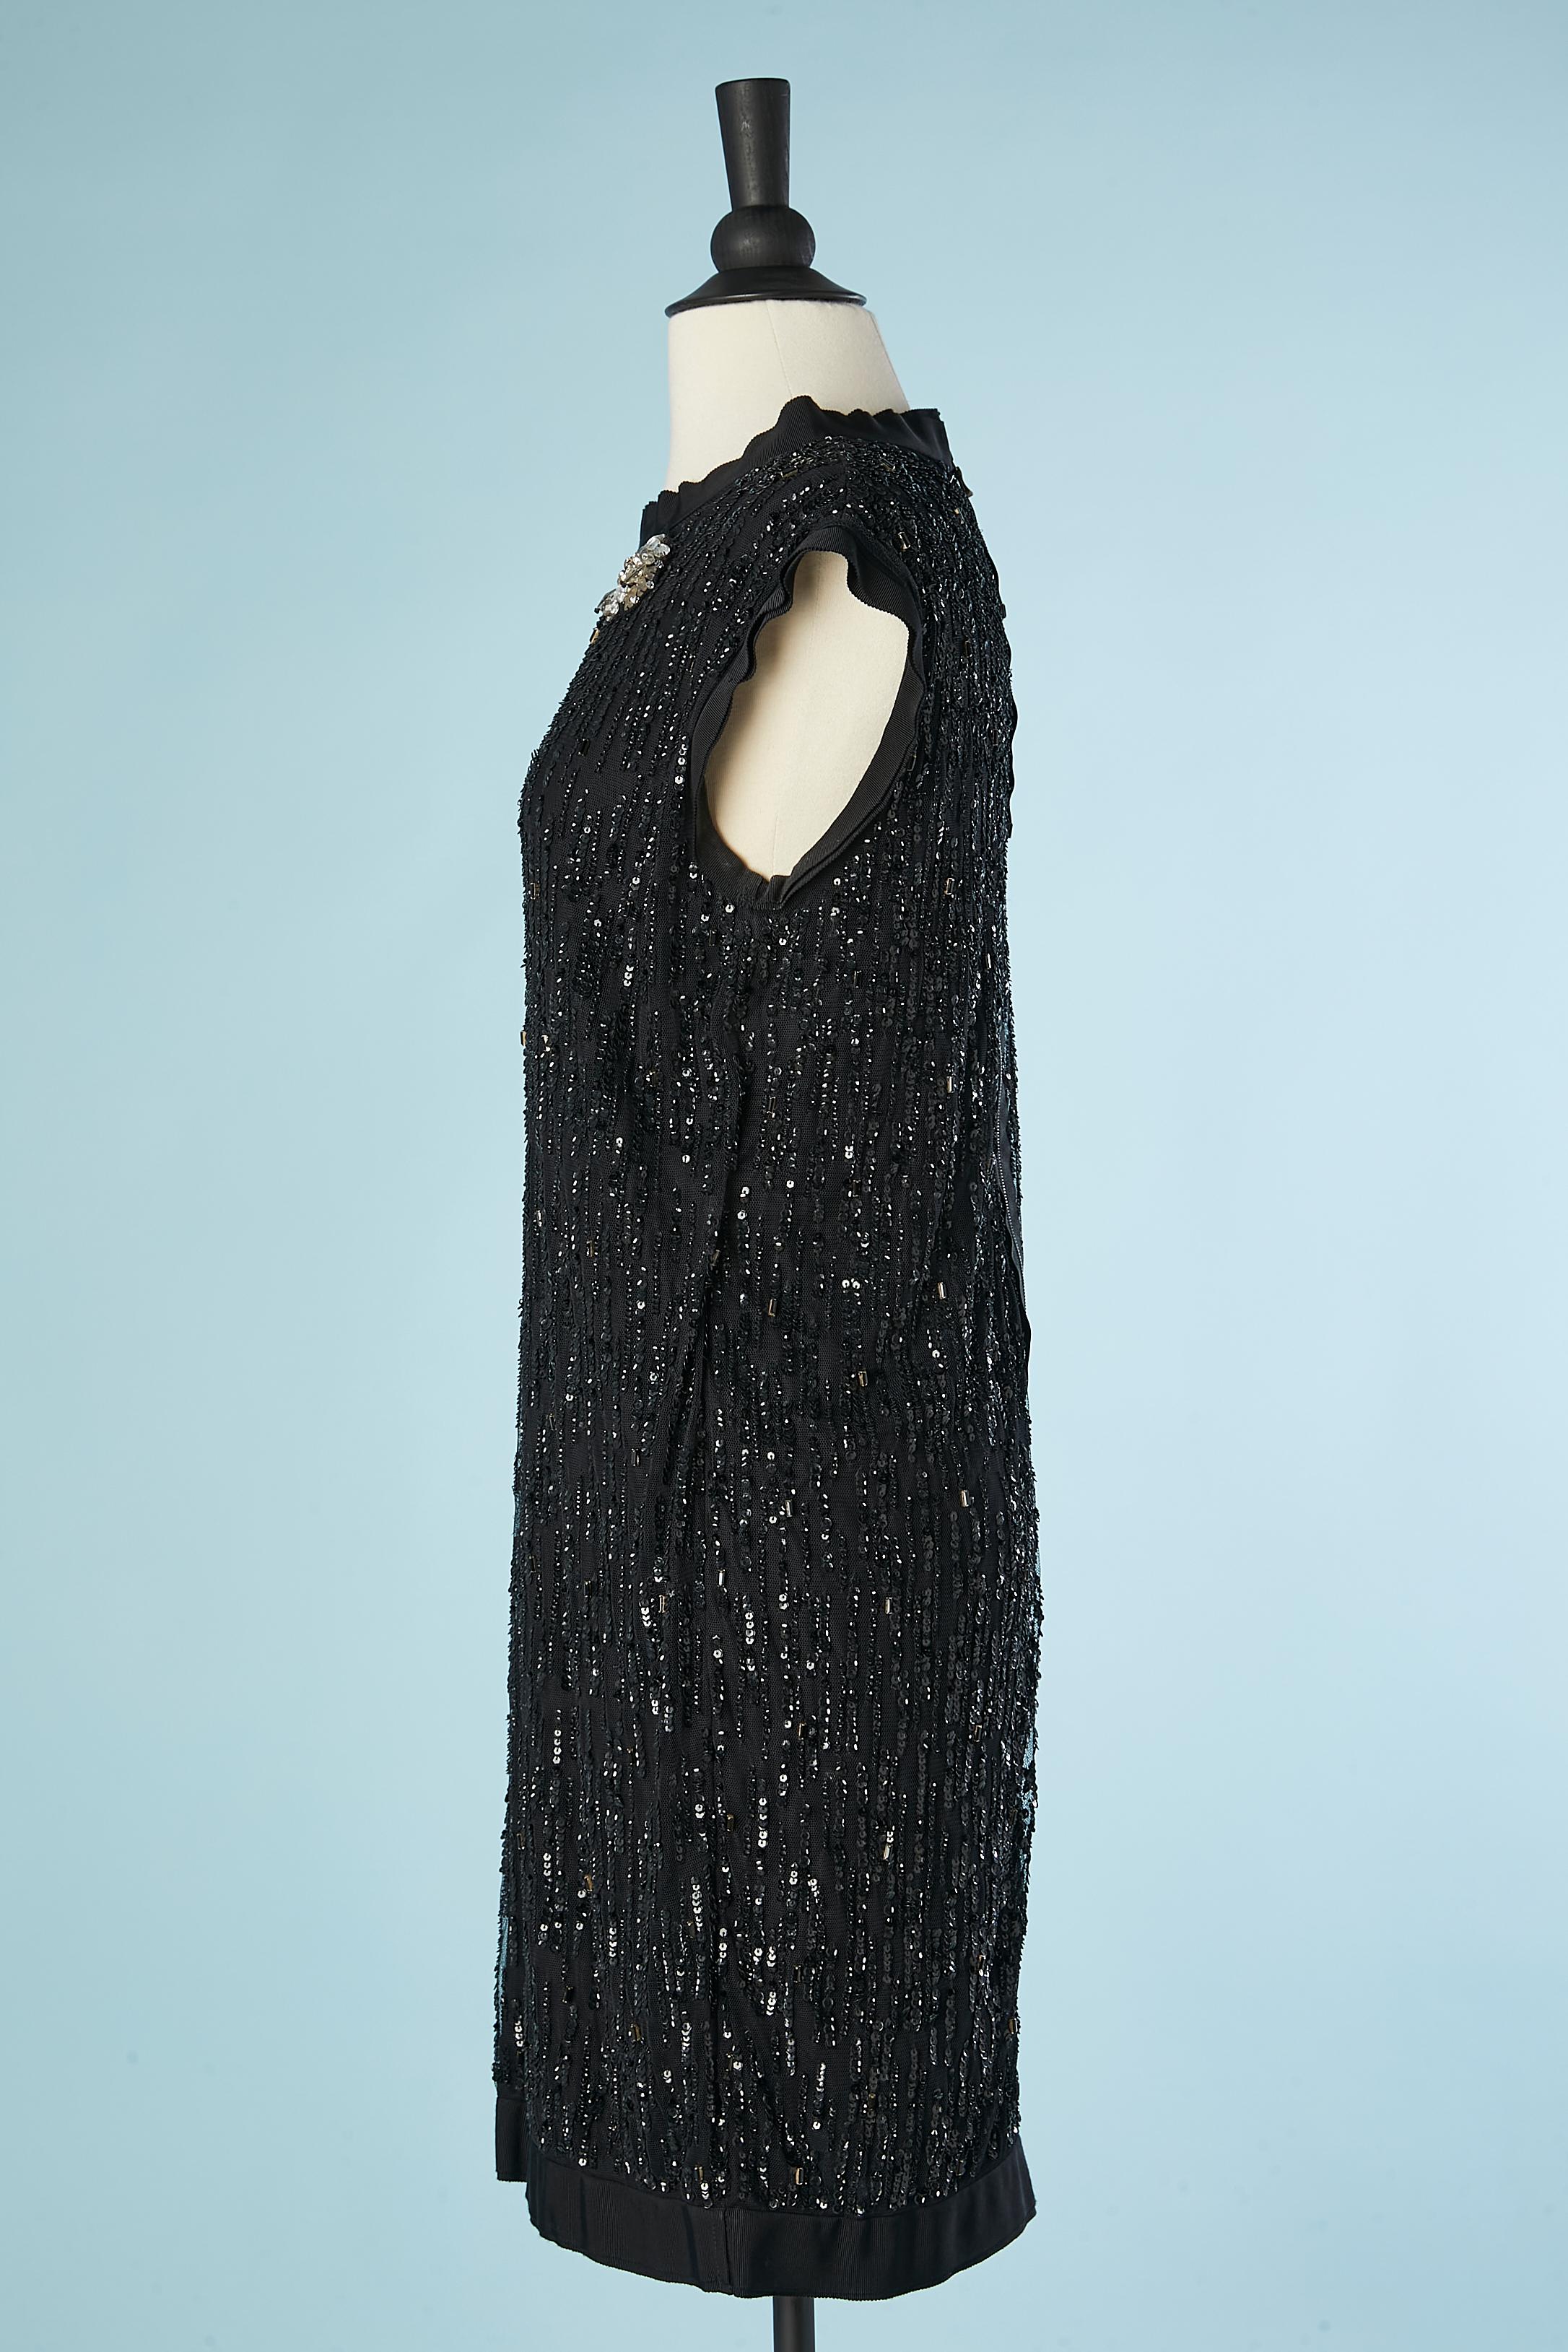 Black sequin dress on tulle base with rhinestone brooches Lanvin by Alber Elbaz For Sale 2